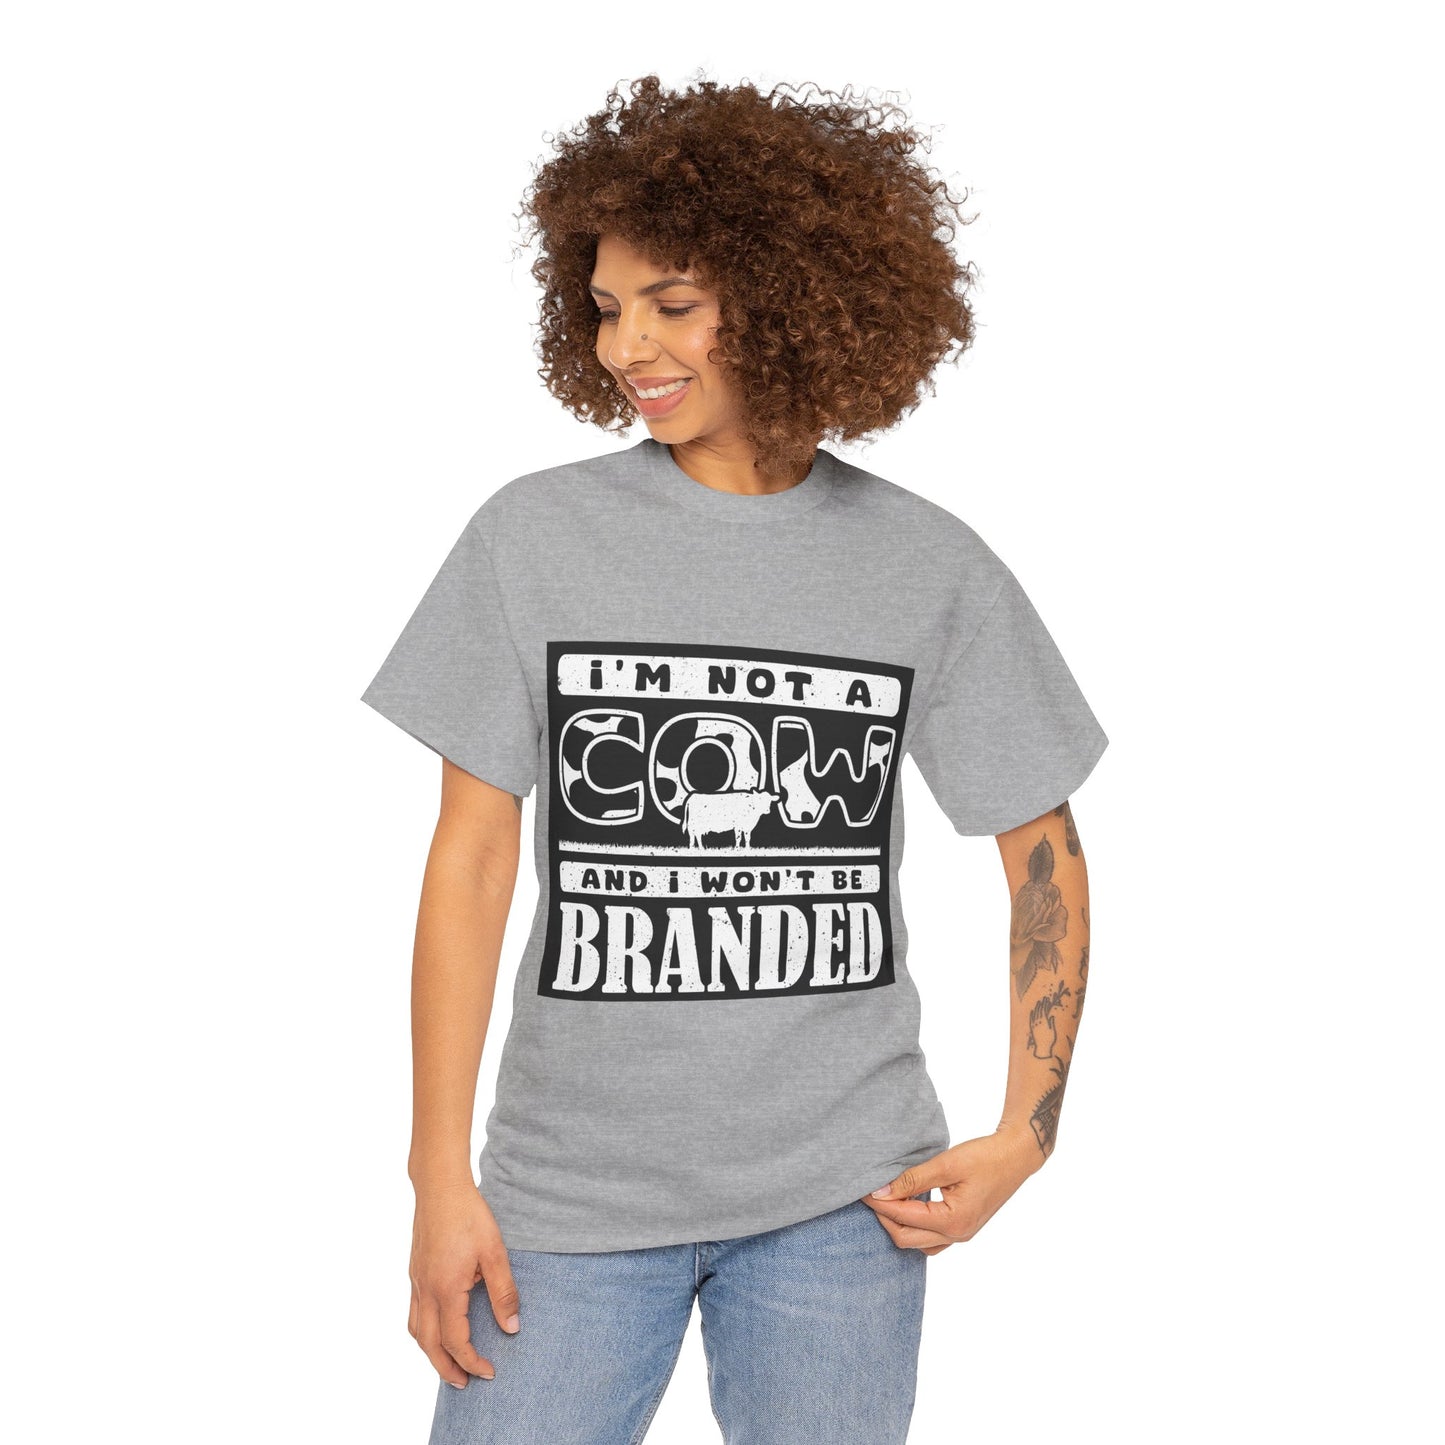 The Free Thinker T-Shirt: I'm not a cow and I won't be branded